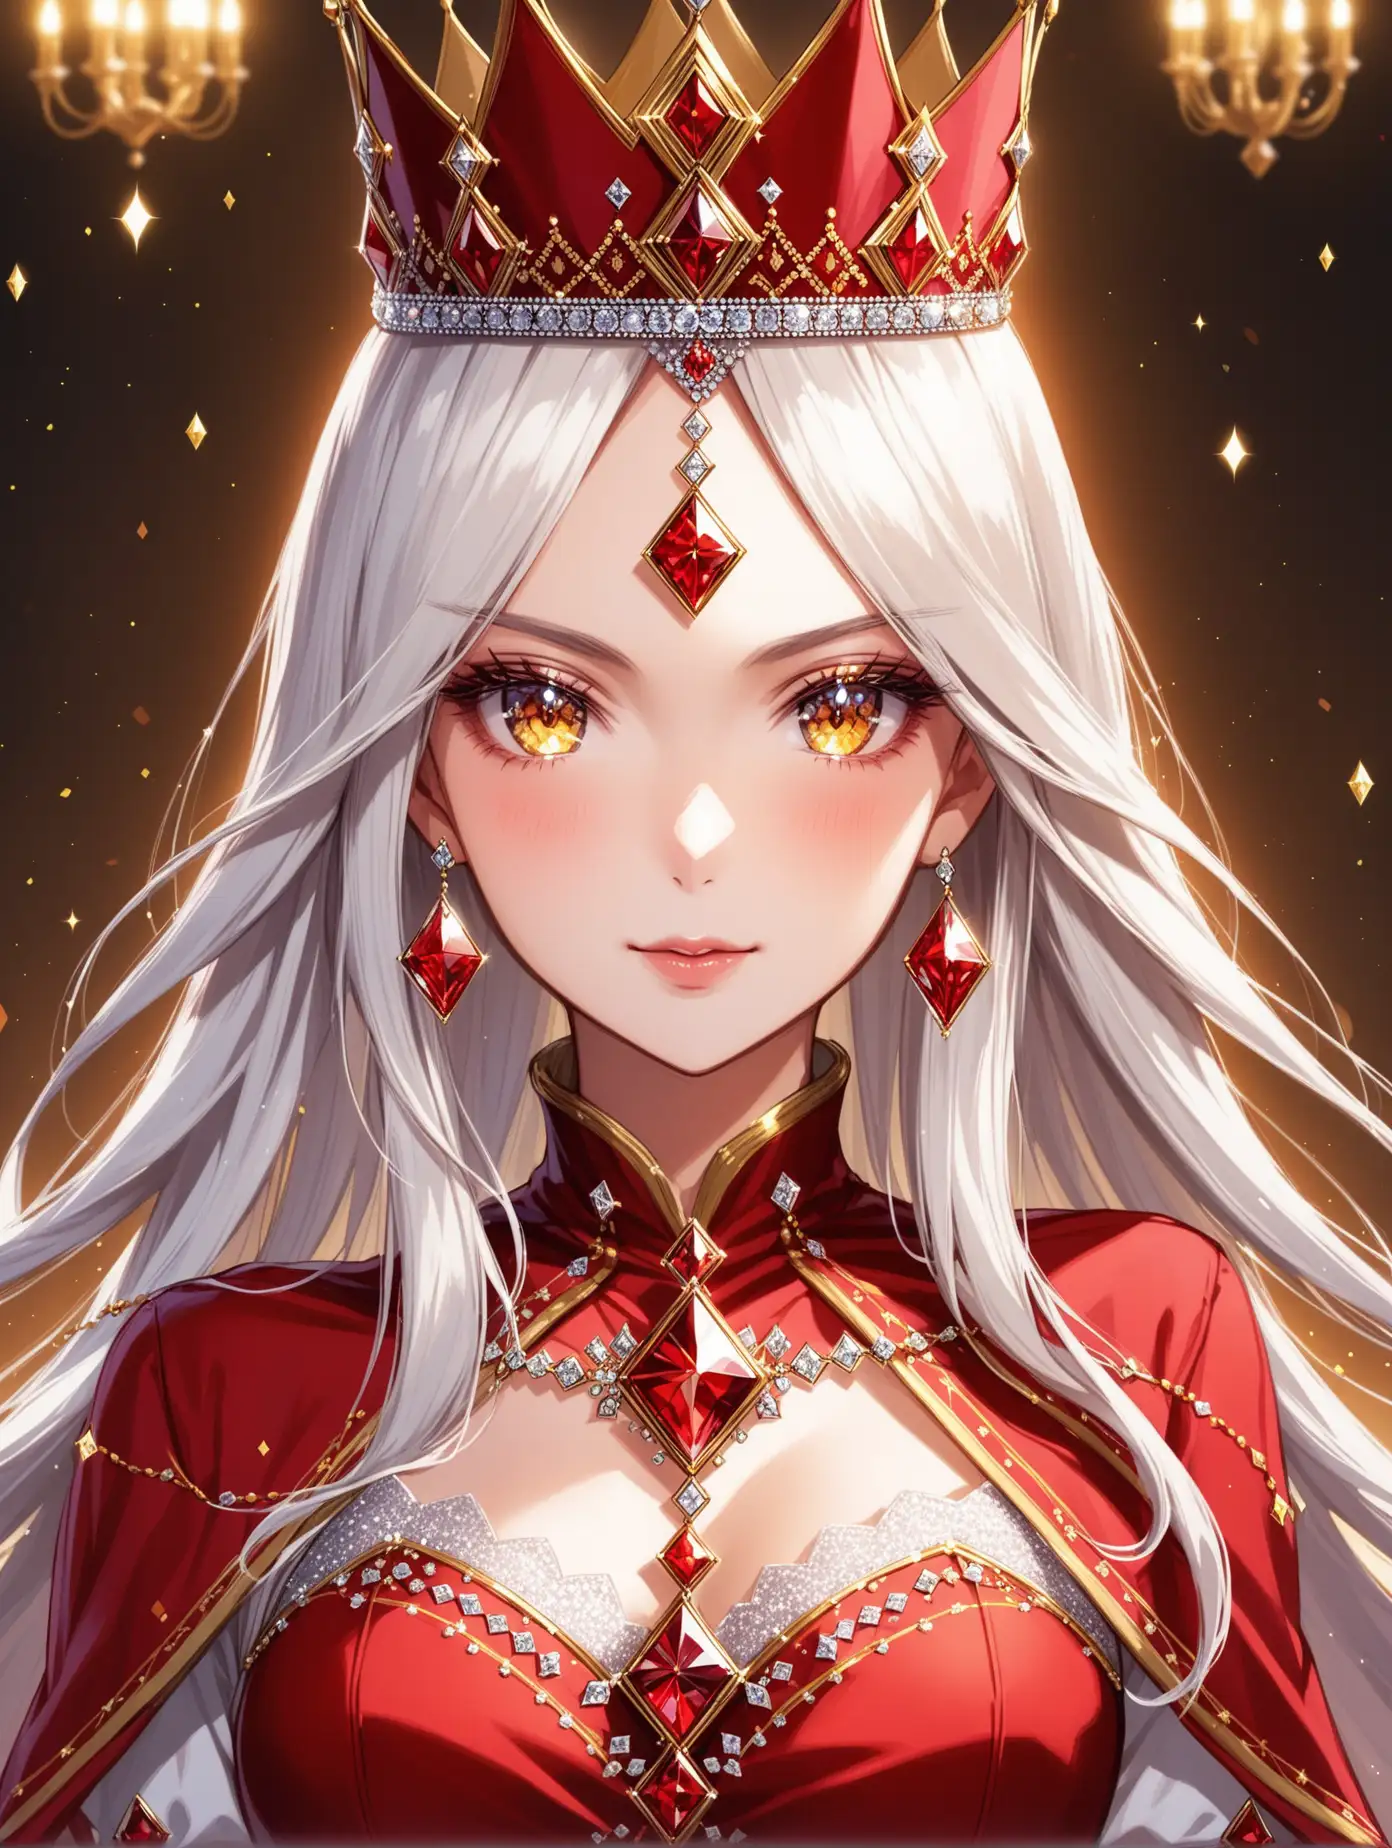 Regal Queen Holding Ace Card with Red Diamond Crown